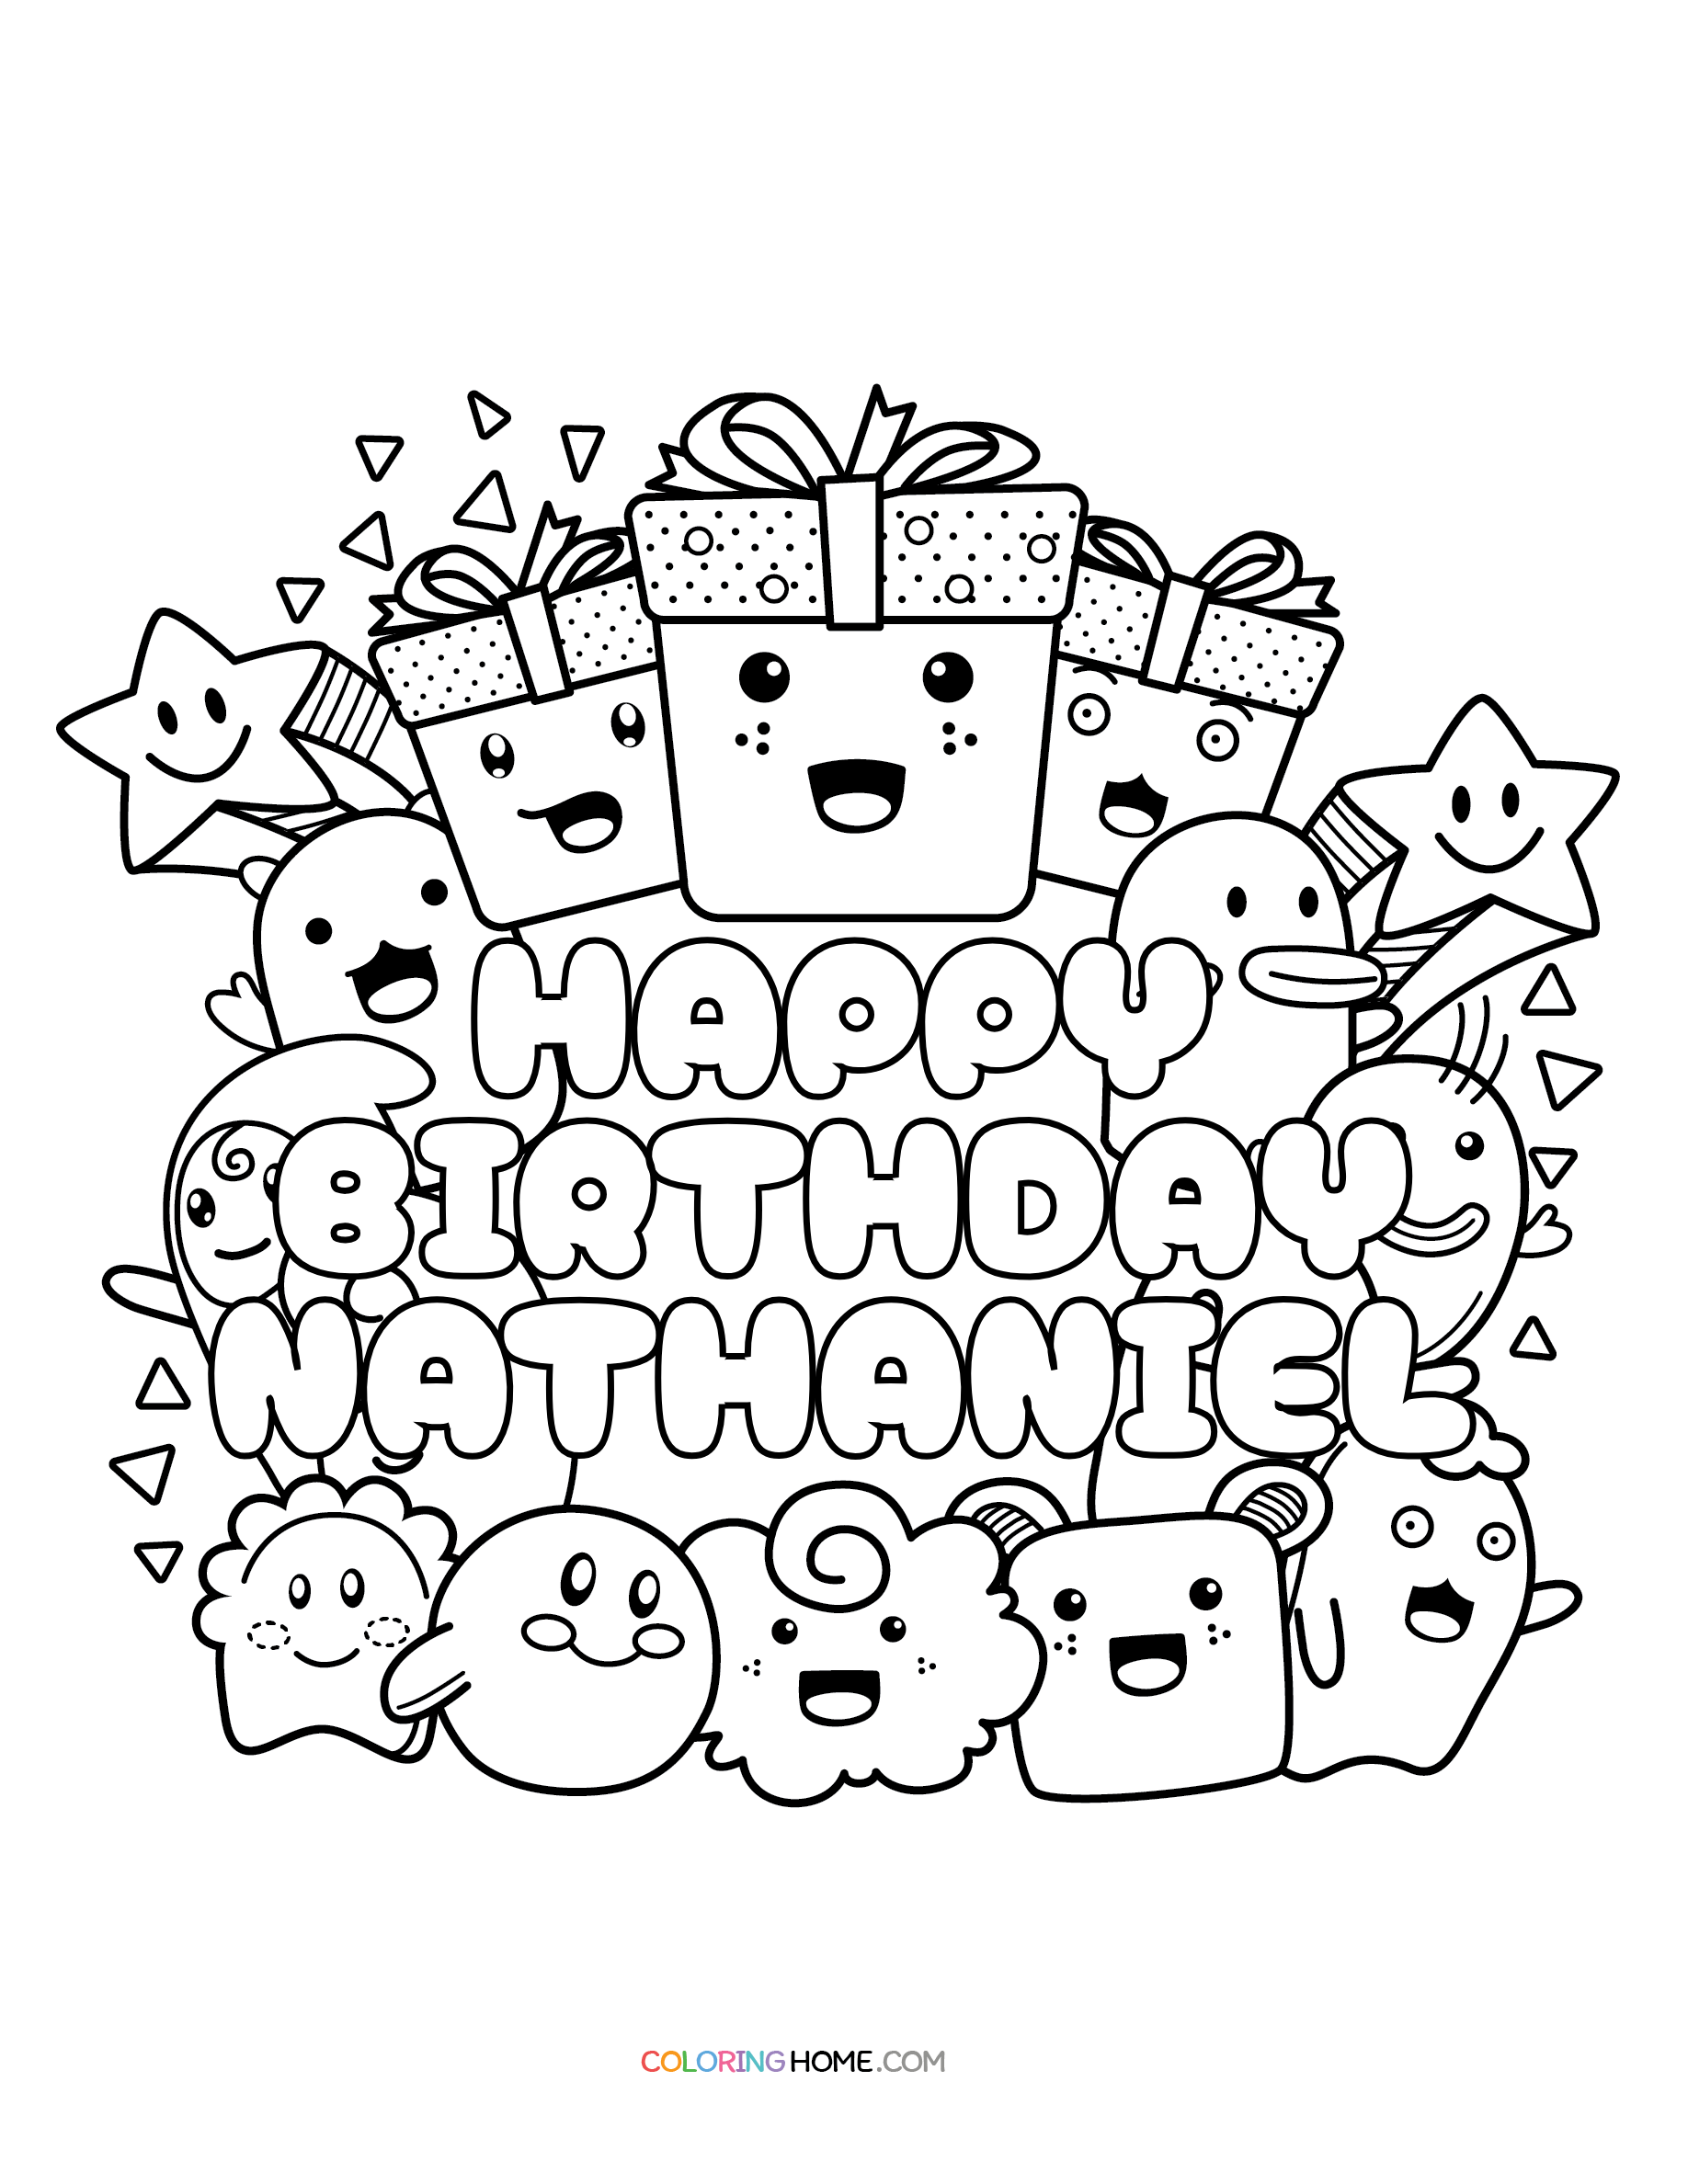 Happy Birthday Nathaniel coloring page